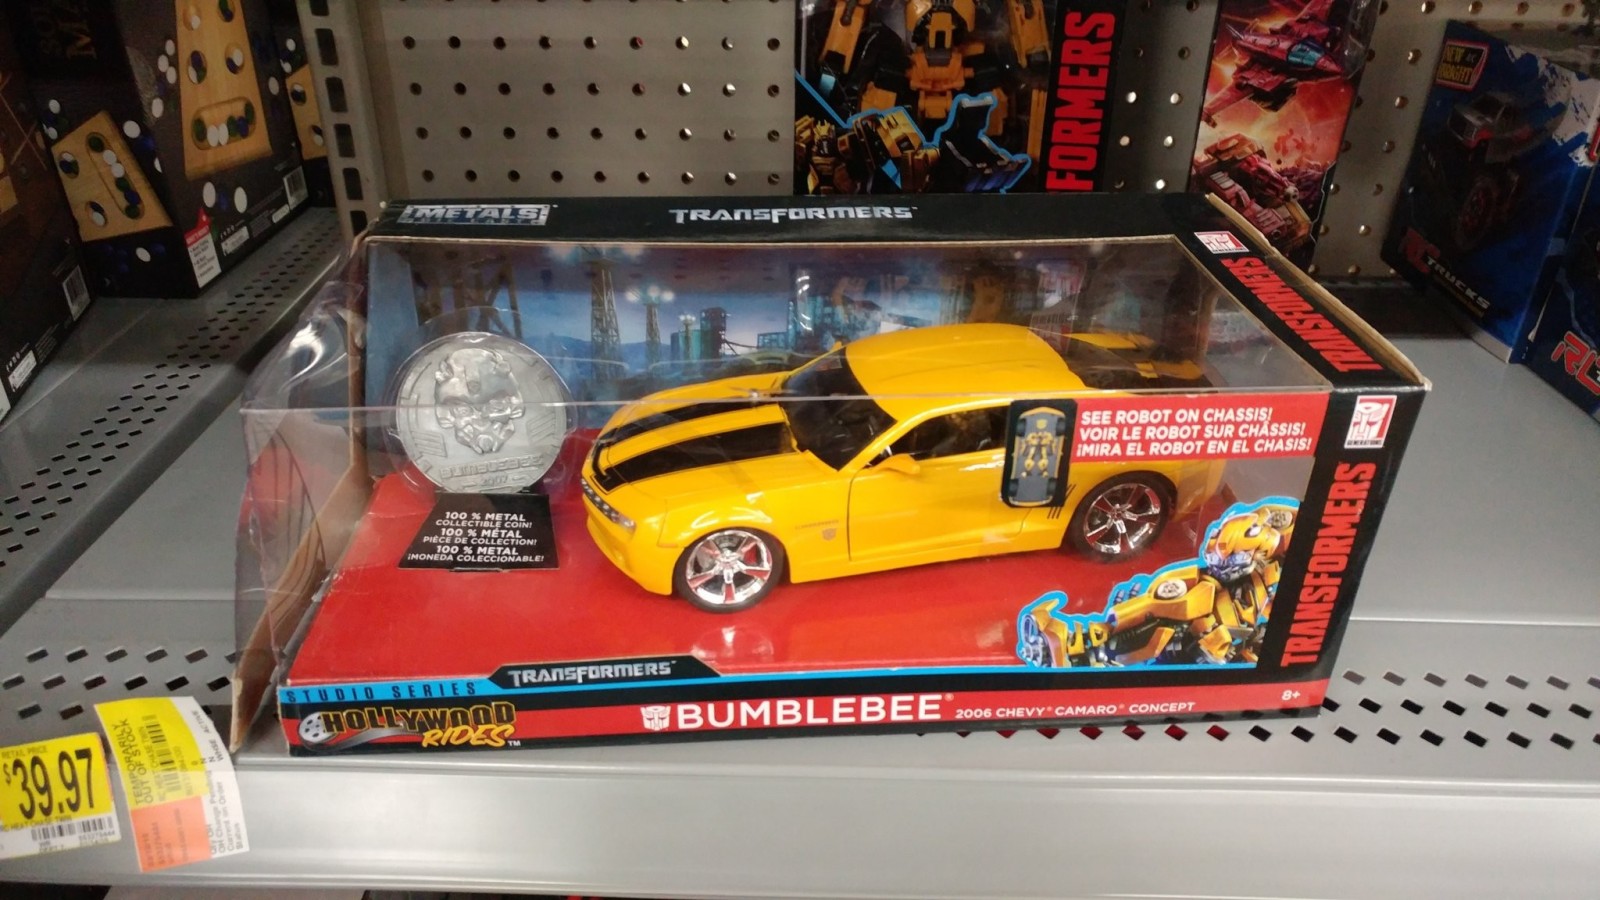 Bumblebee Transformers Ultimate 2007 Chevy Camaro - toys & games